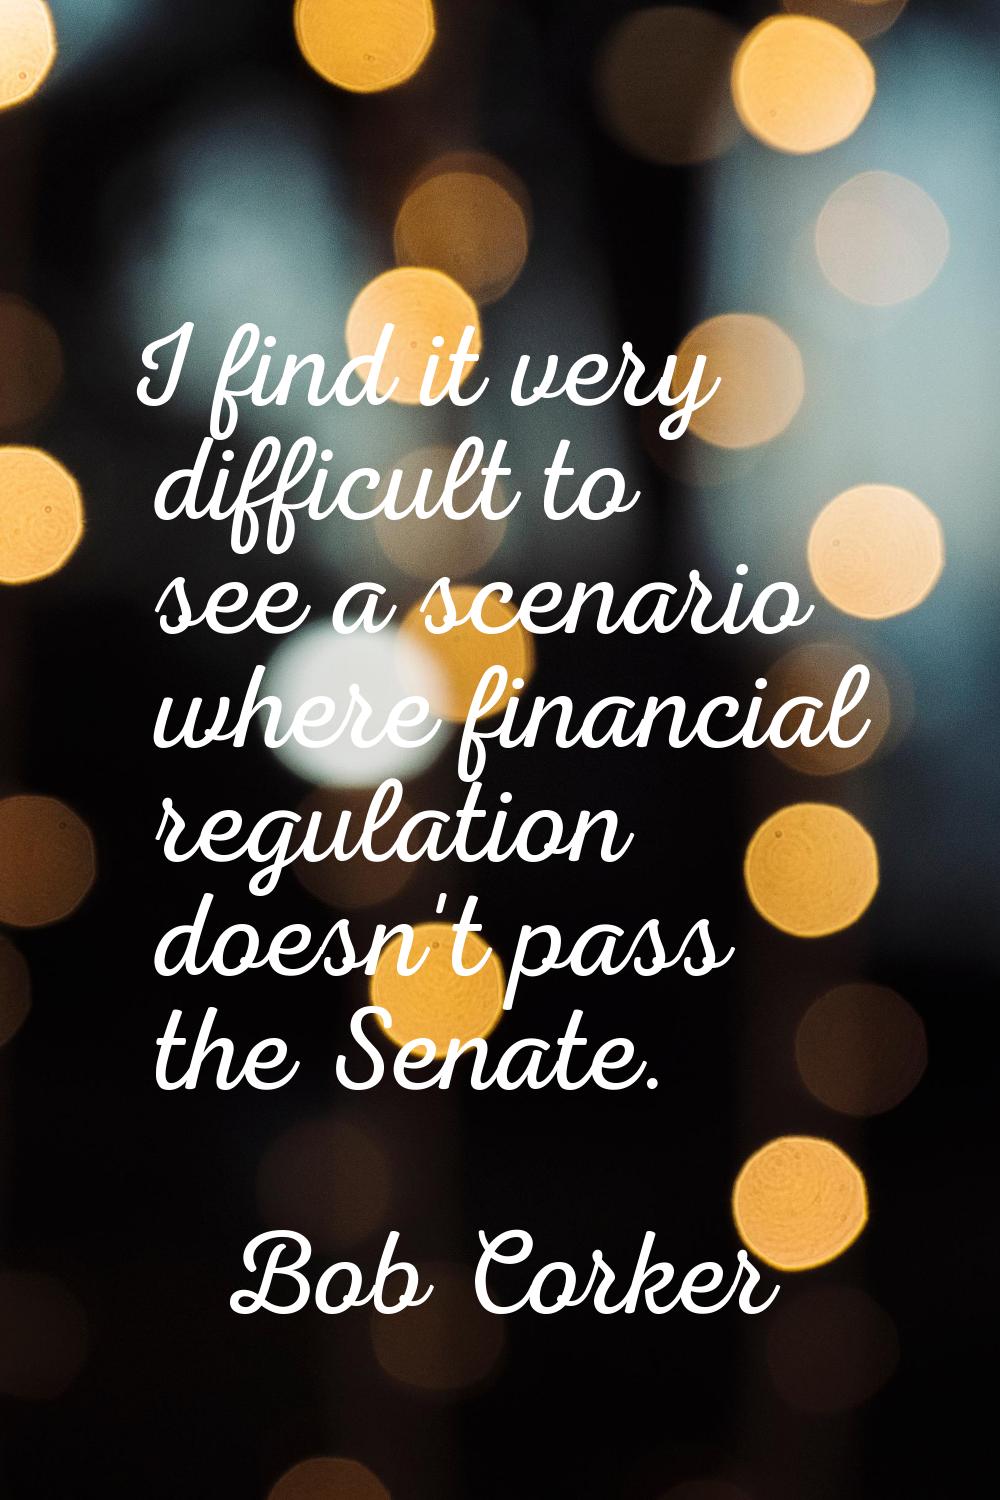 I find it very difficult to see a scenario where financial regulation doesn't pass the Senate.